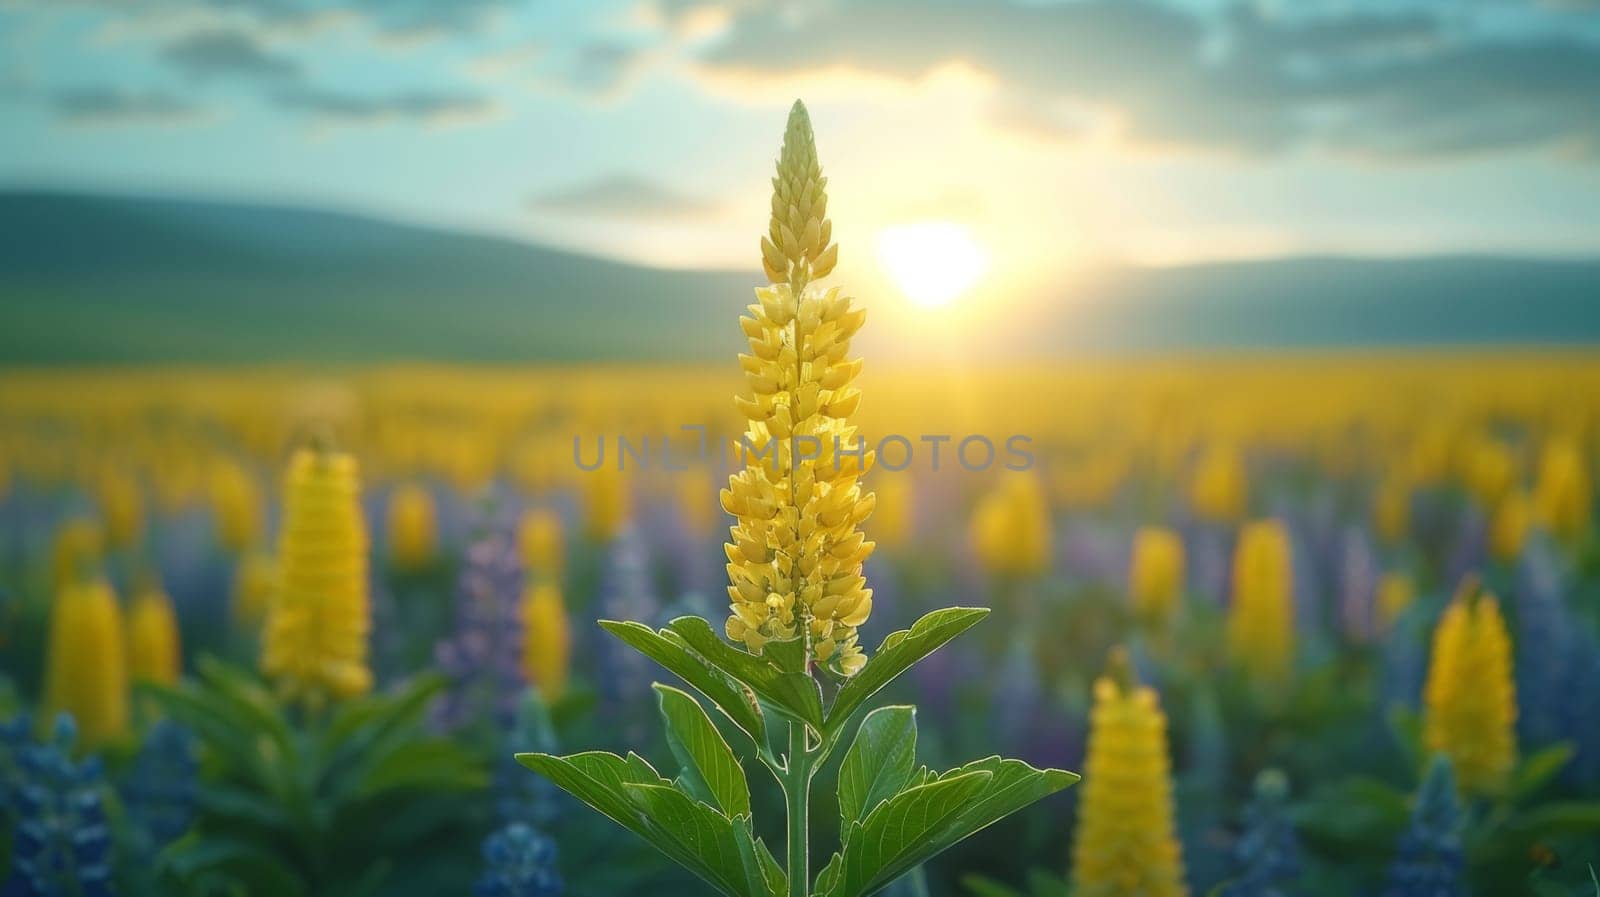 A field of yellow flowers with a sun setting in the background, AI by starush